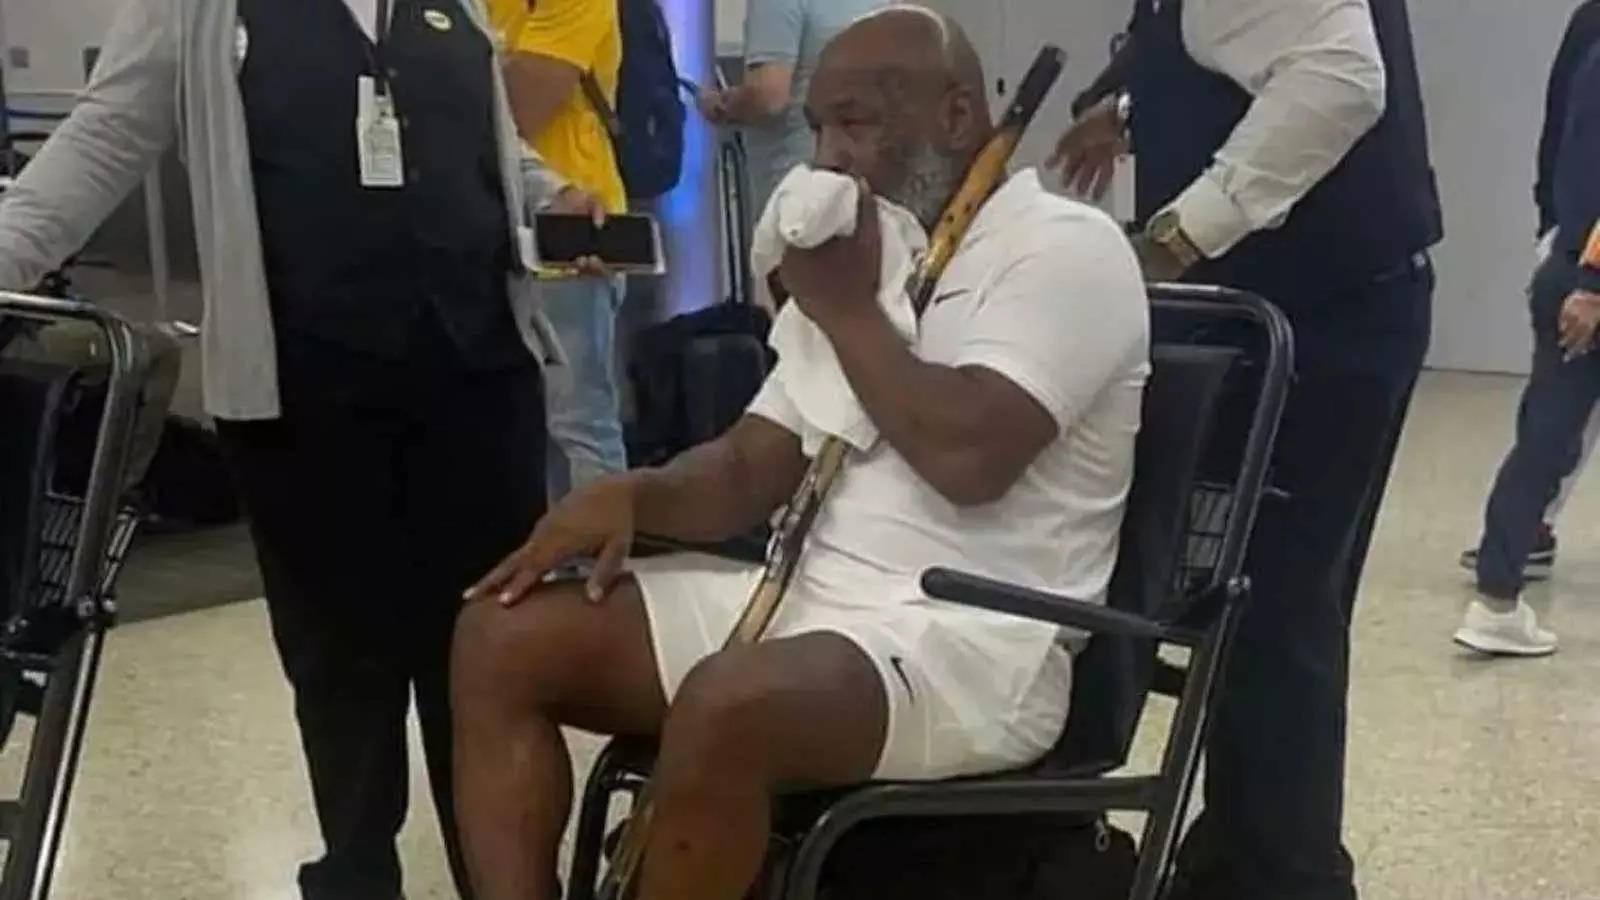 Mike Tyson was spotted in a wheelchair at the Miami airport